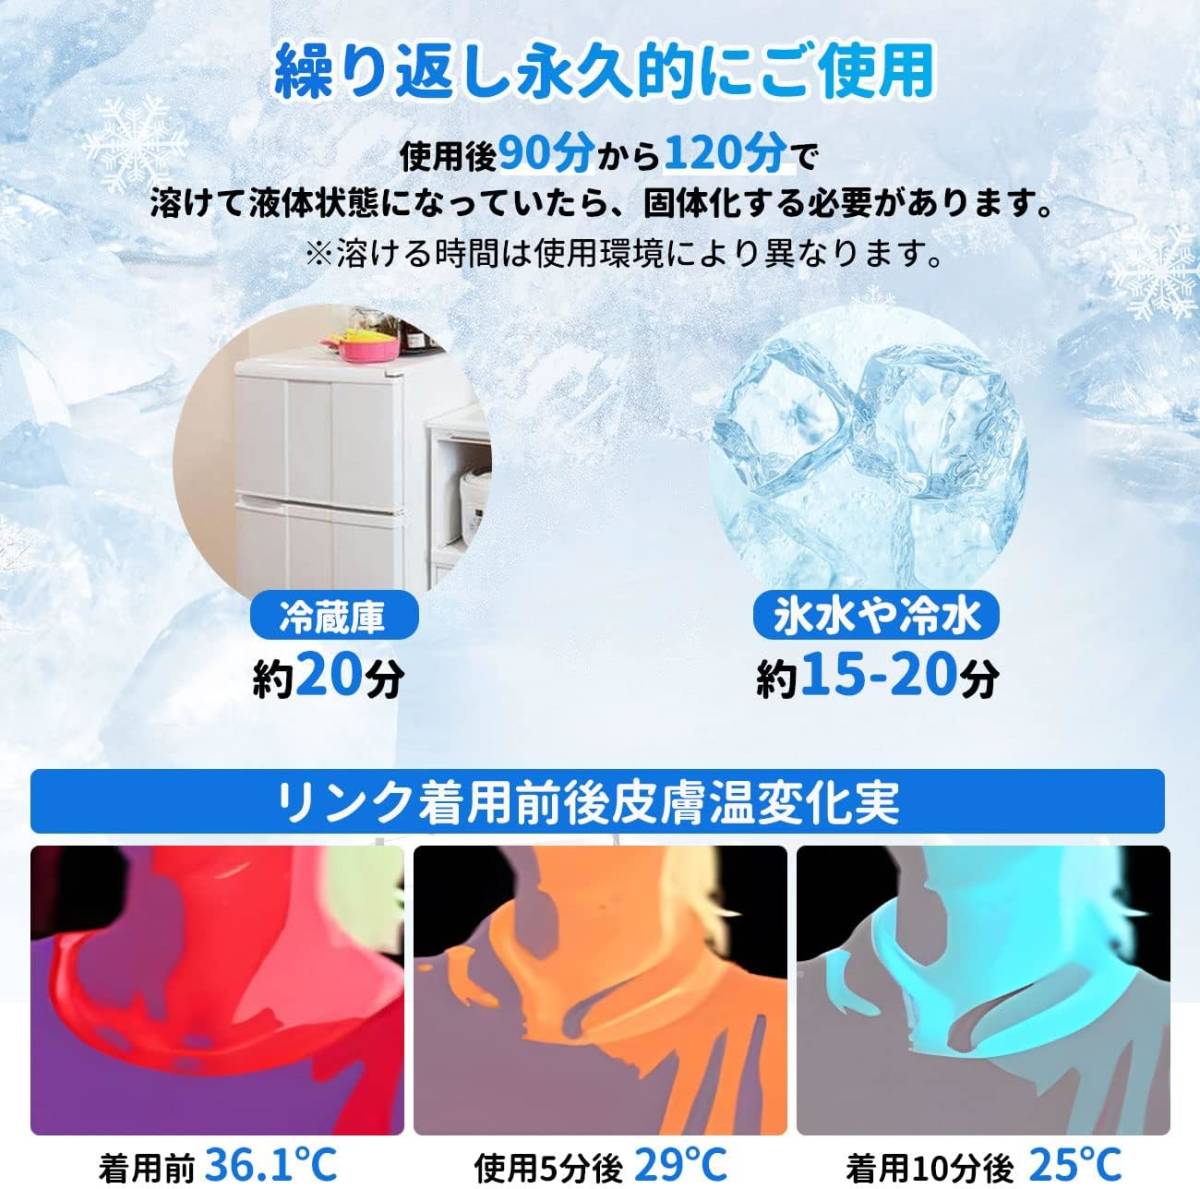  ice neck ring cool neck ring neck cooler 28*C neck .. neck cooling nature .. cold sensation .... cooling tube man and woman use G6